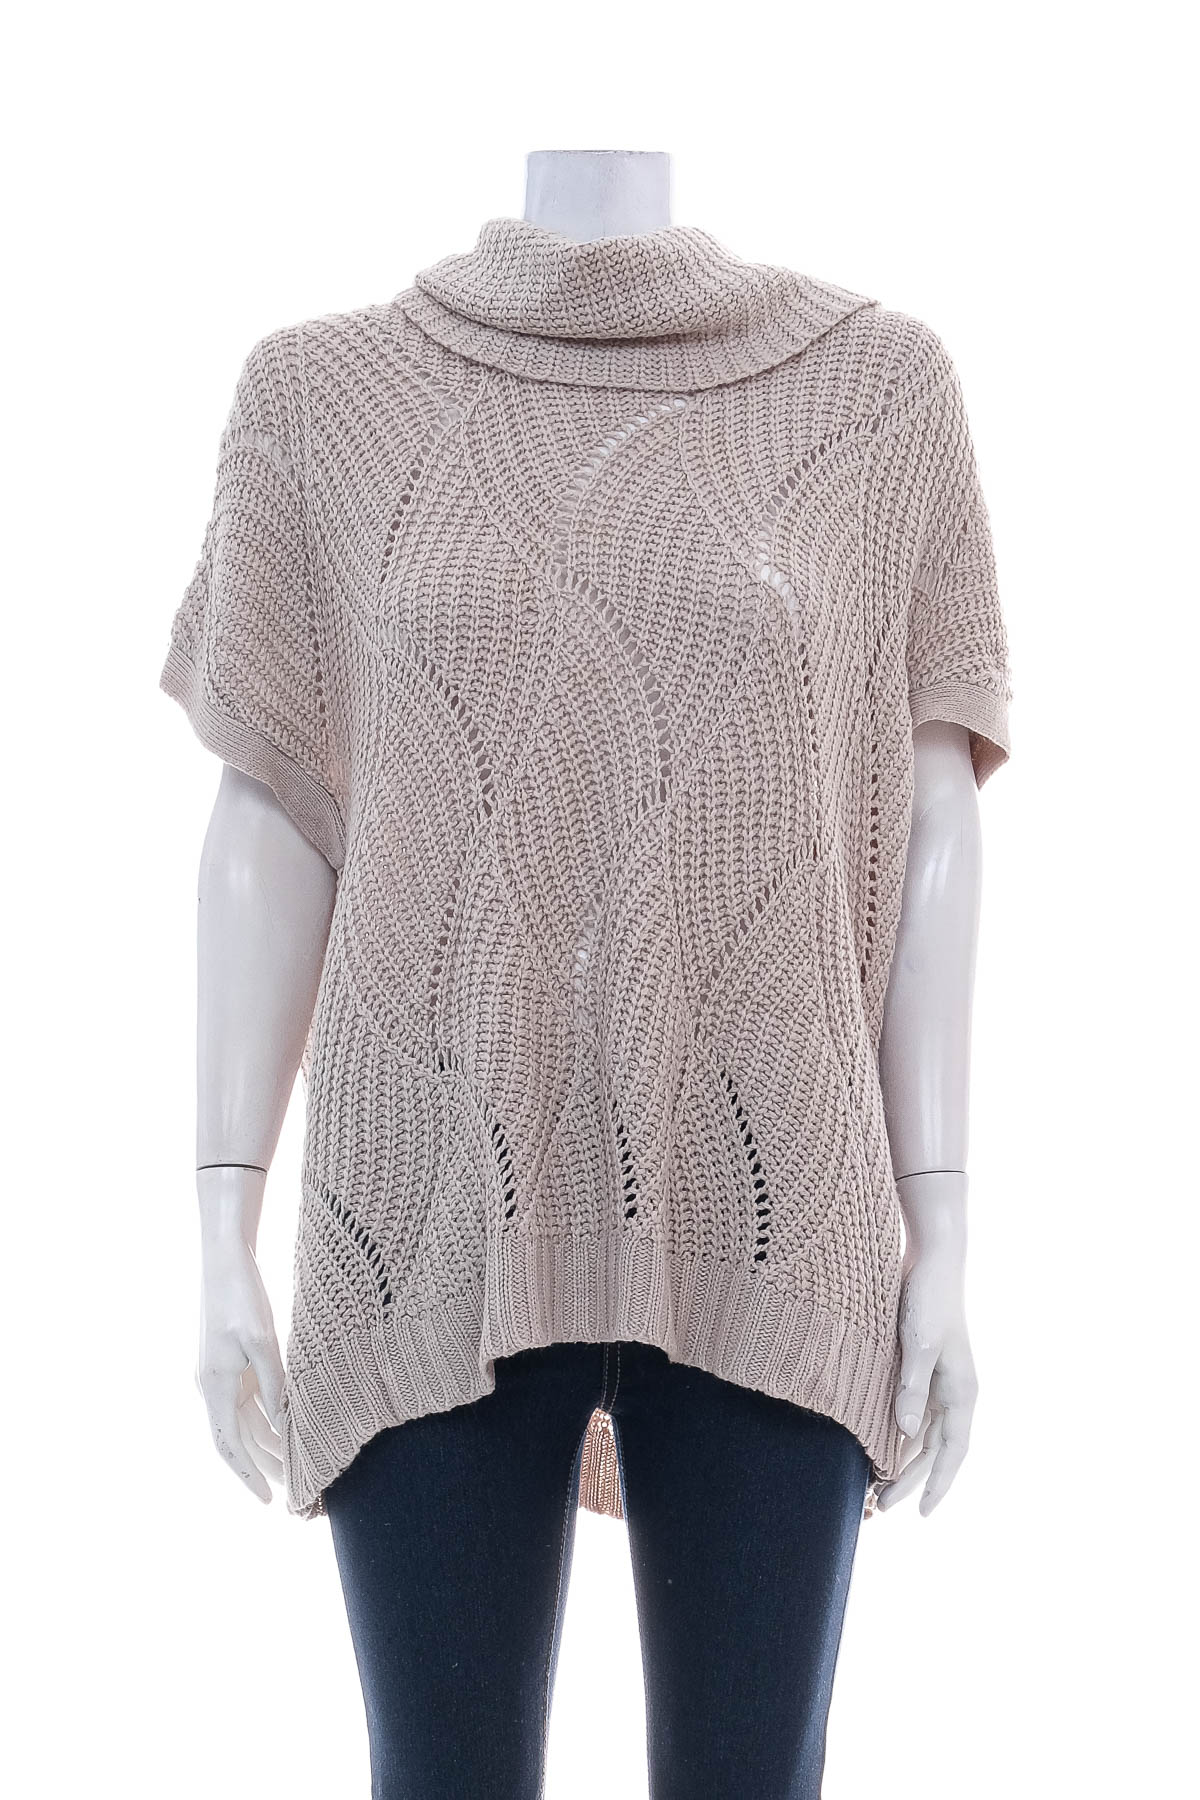 Women's sweater - THE LIMITED - 0